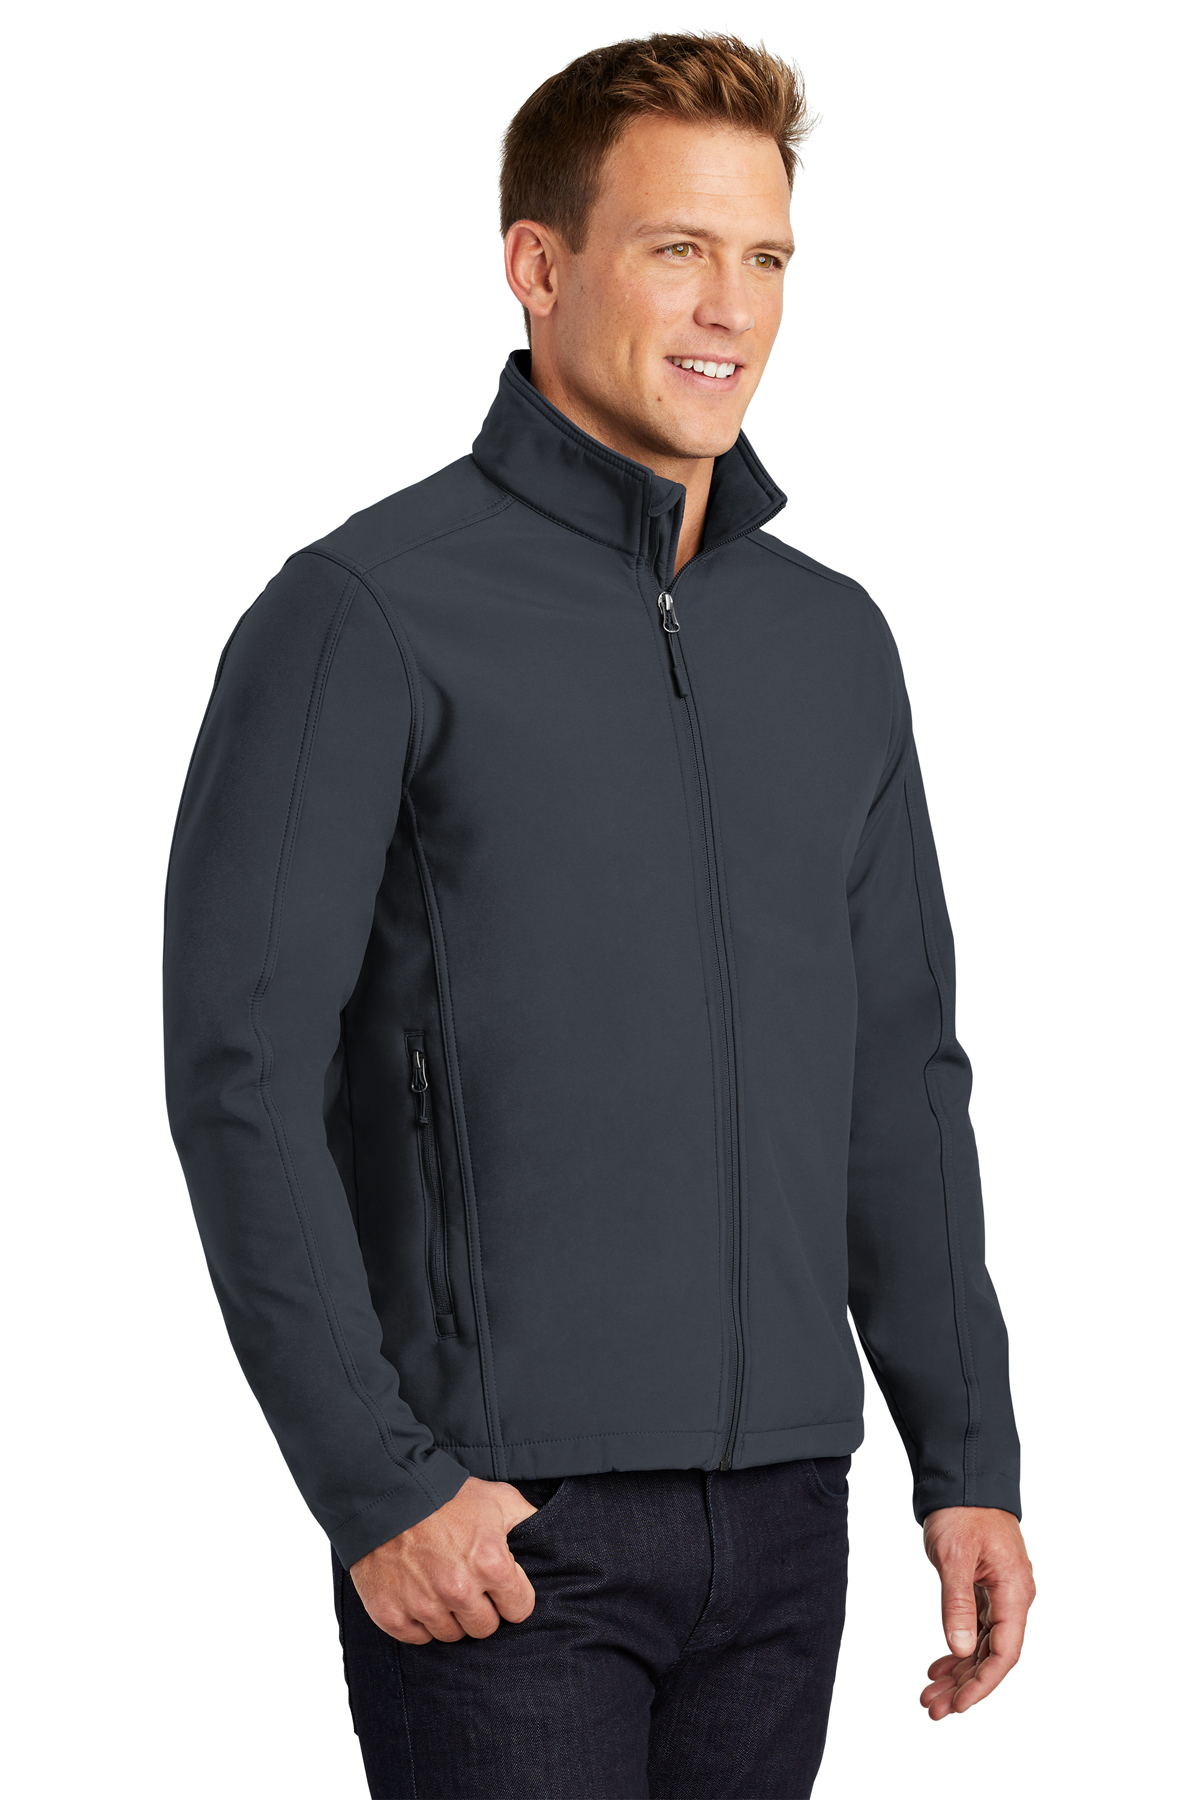 Port Authority Tall Core Soft Shell Jacket | Product | SanMar